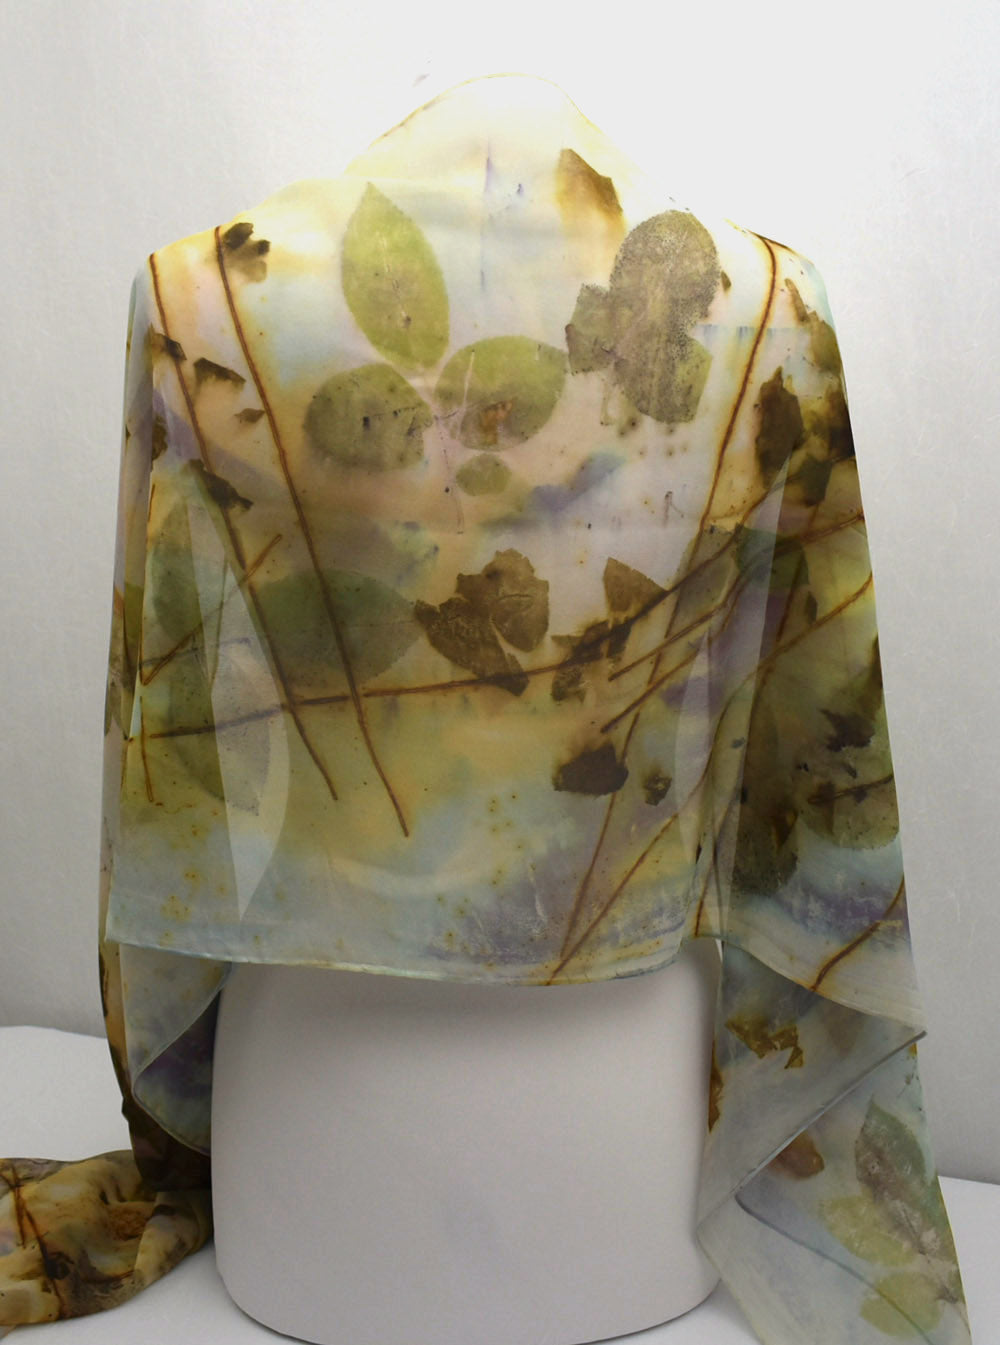 Hand Dyed Eco Printed Leaves on Wearable Art Fashion Statement Silk Chiffon Scarf/Shawl Clothing